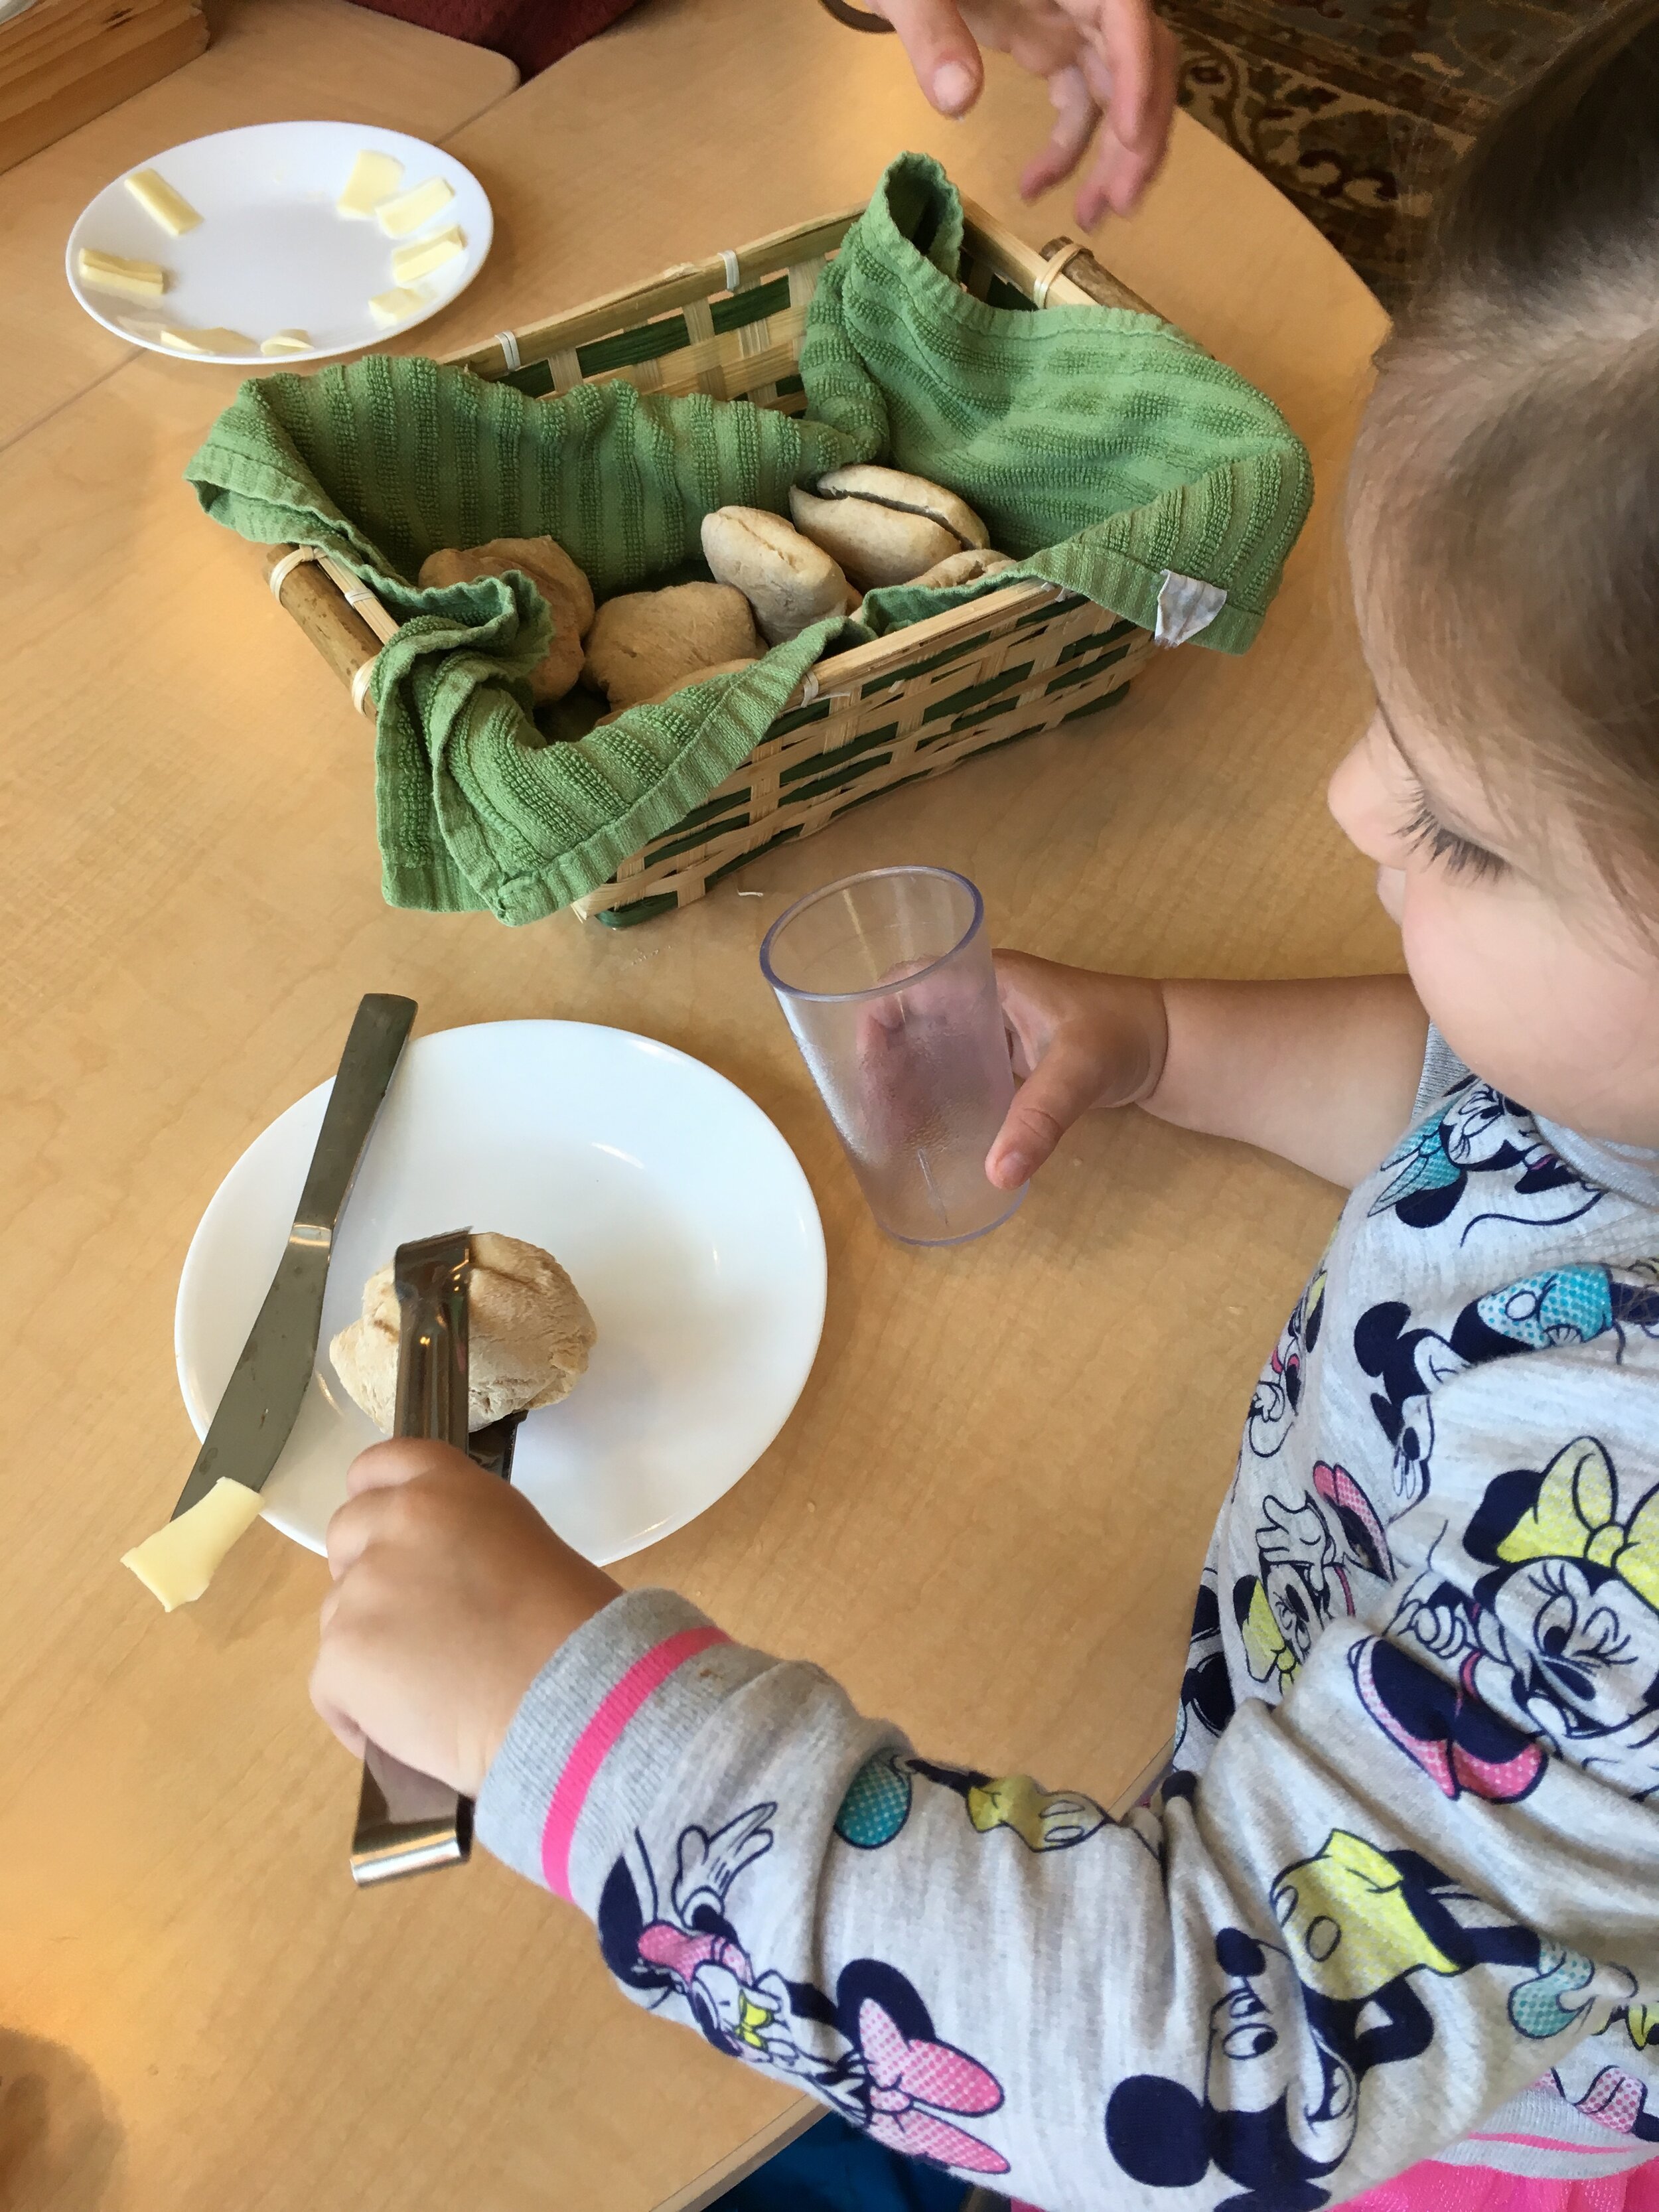 Toddler Cooking Class Harmony Natural Learning Center.JPG